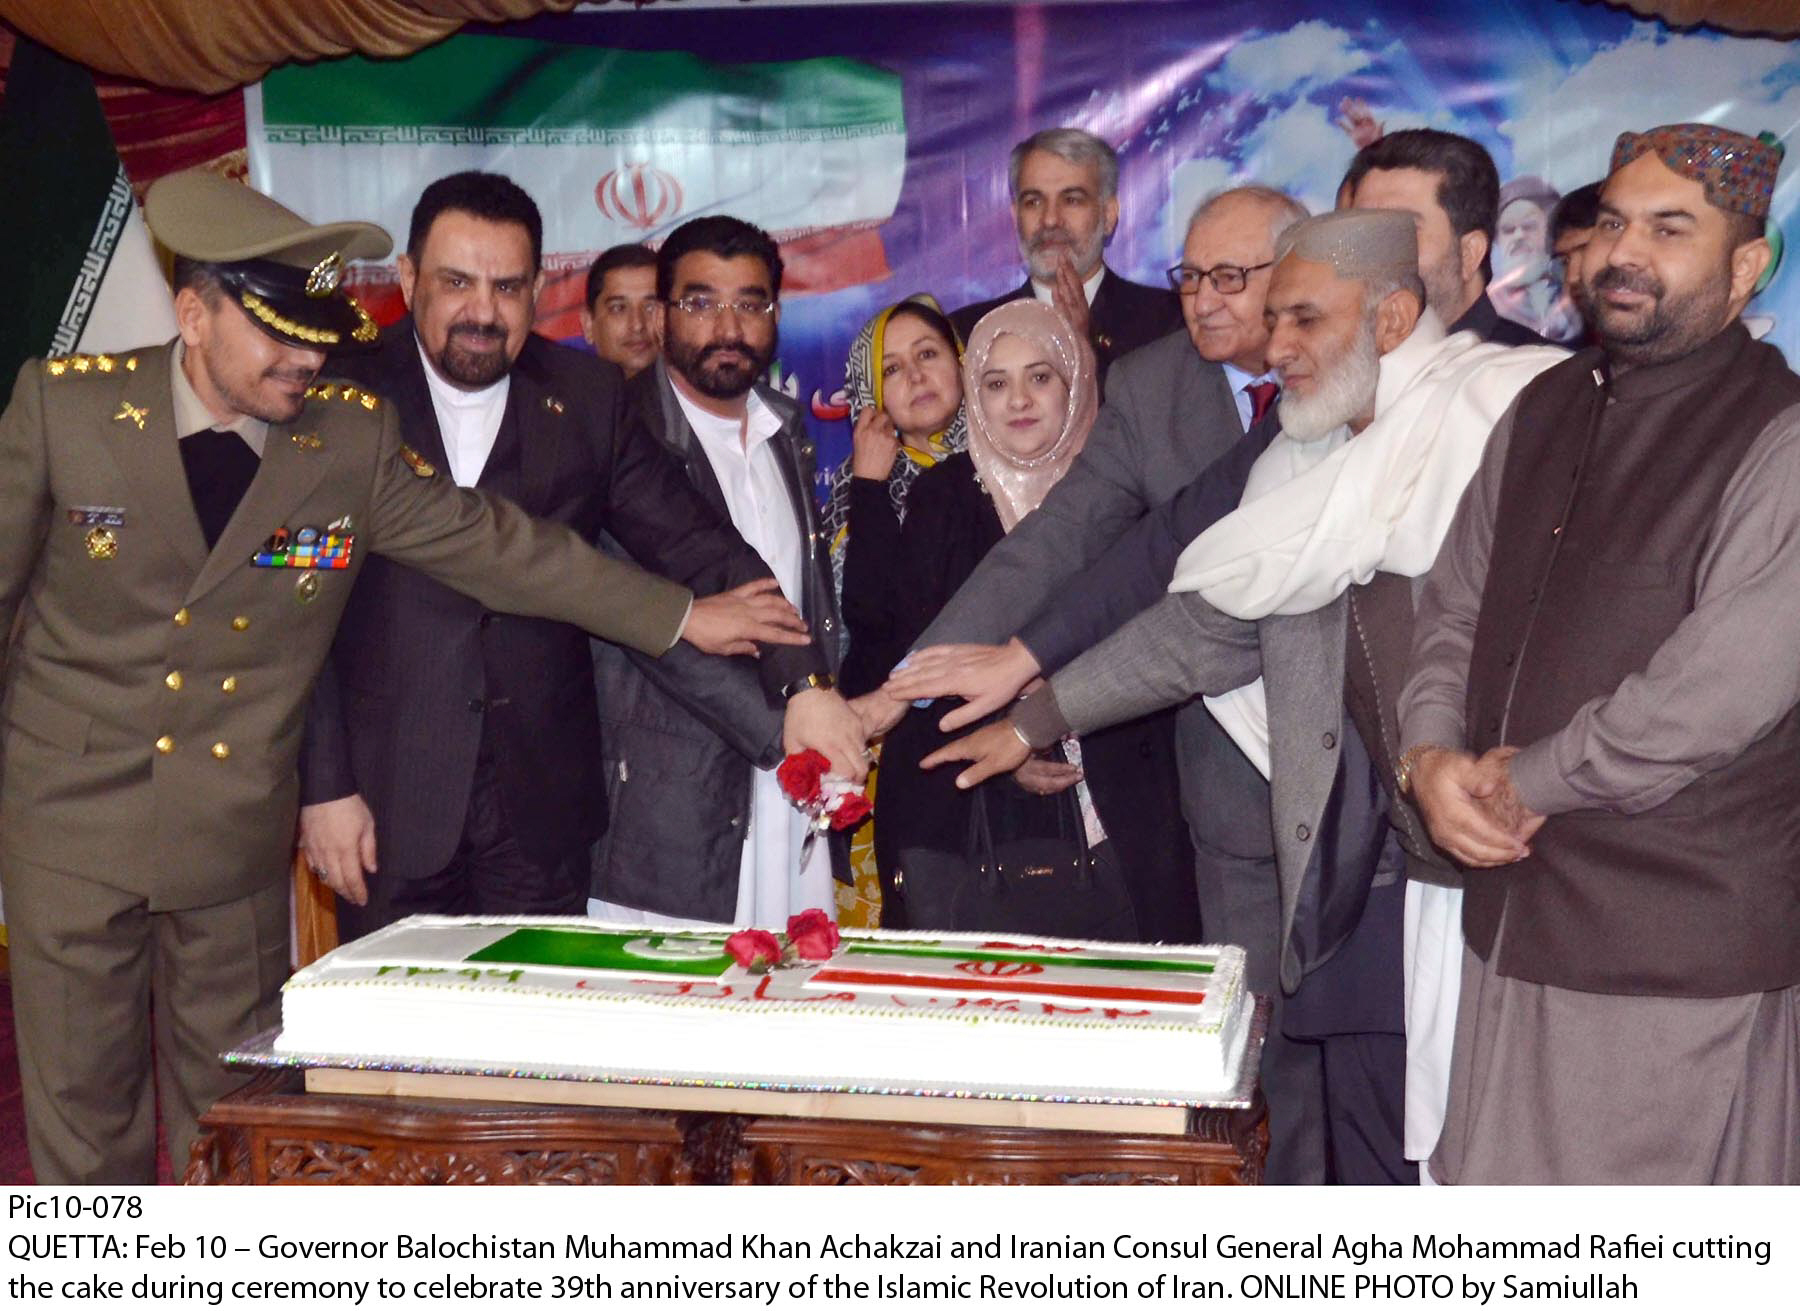 balochistan governor mohammad khan achakzai and iranian consul general agha mohammad rafiei along with others cut a cake during a ceremony to celebrate the 39th anniversary of the islamic revolution in iran photo online